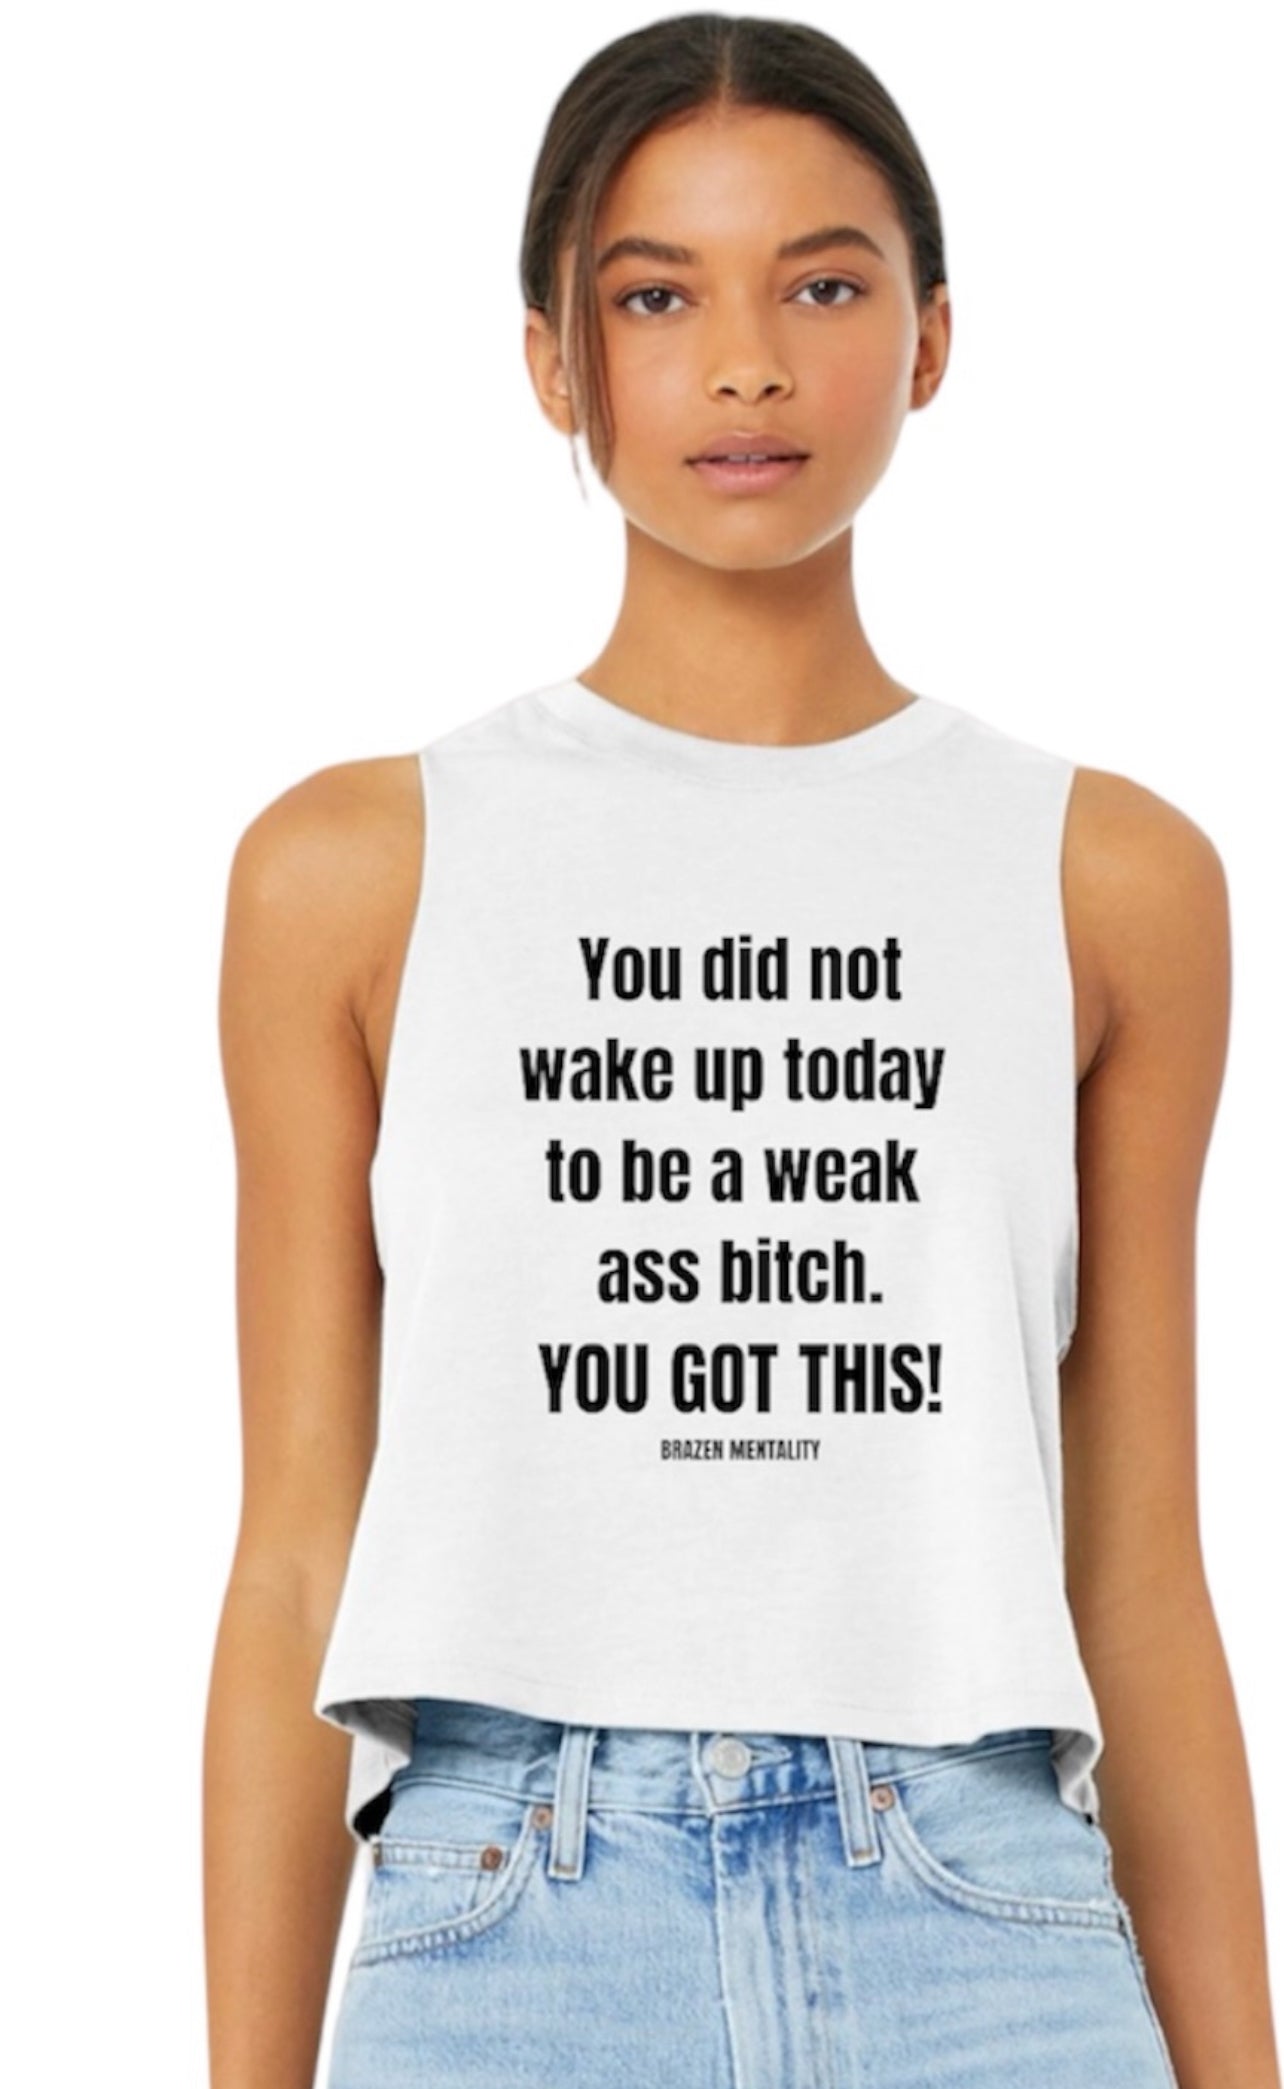 You did not wake up today to be weak